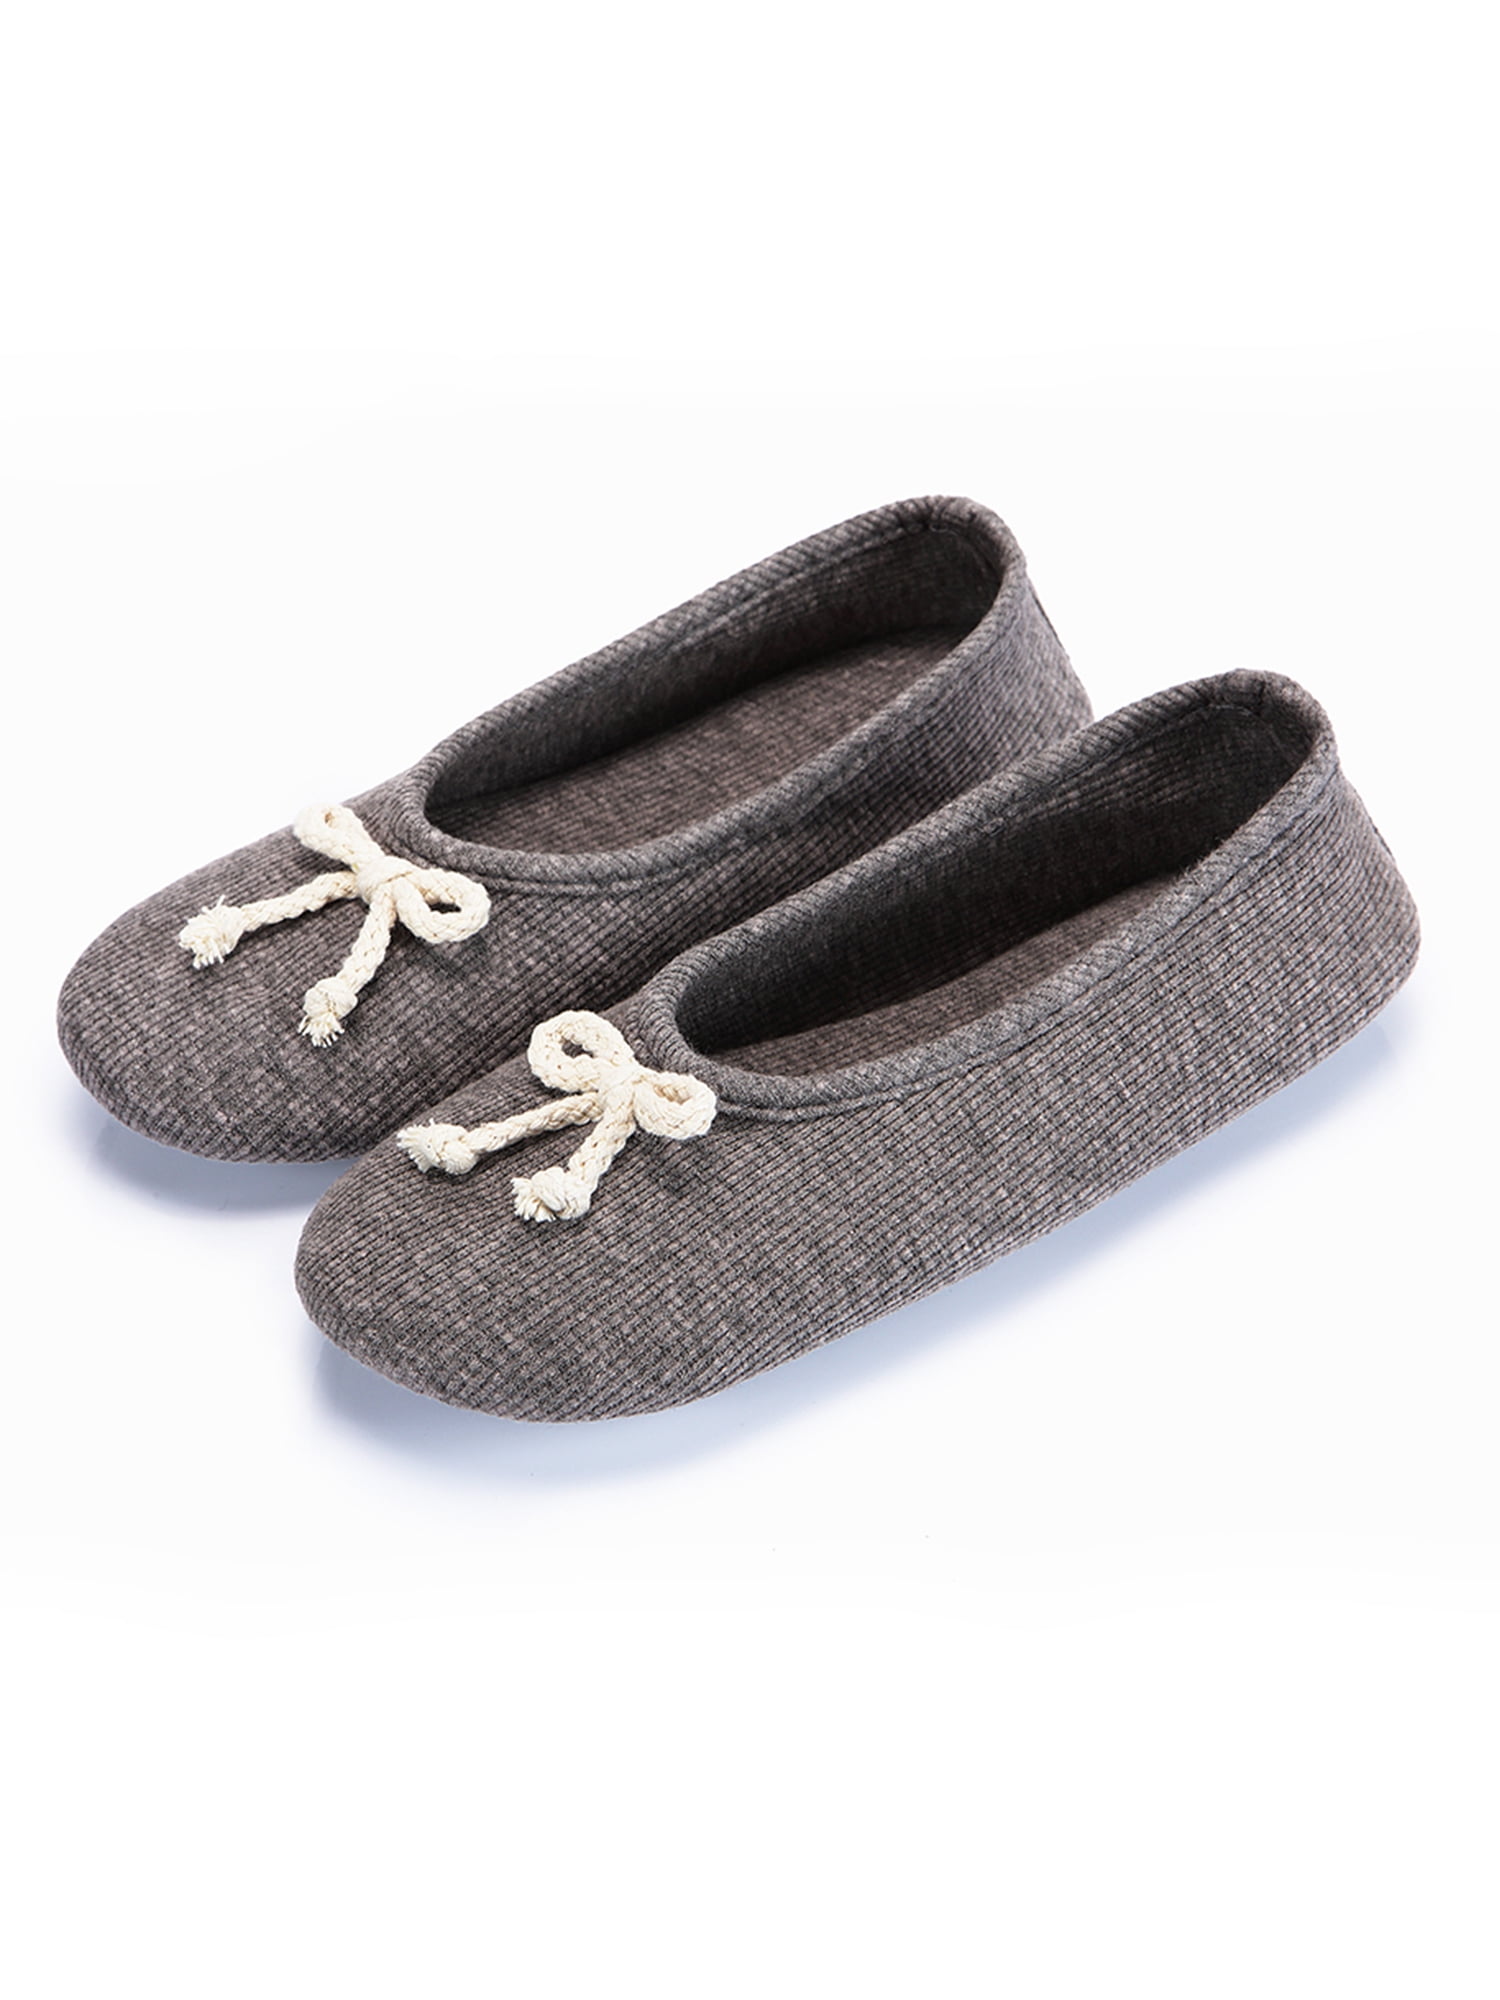 Warm Soft Sole Women Indoor Floor Slippers Shoes Wool Flannel Flat Home Slippers 